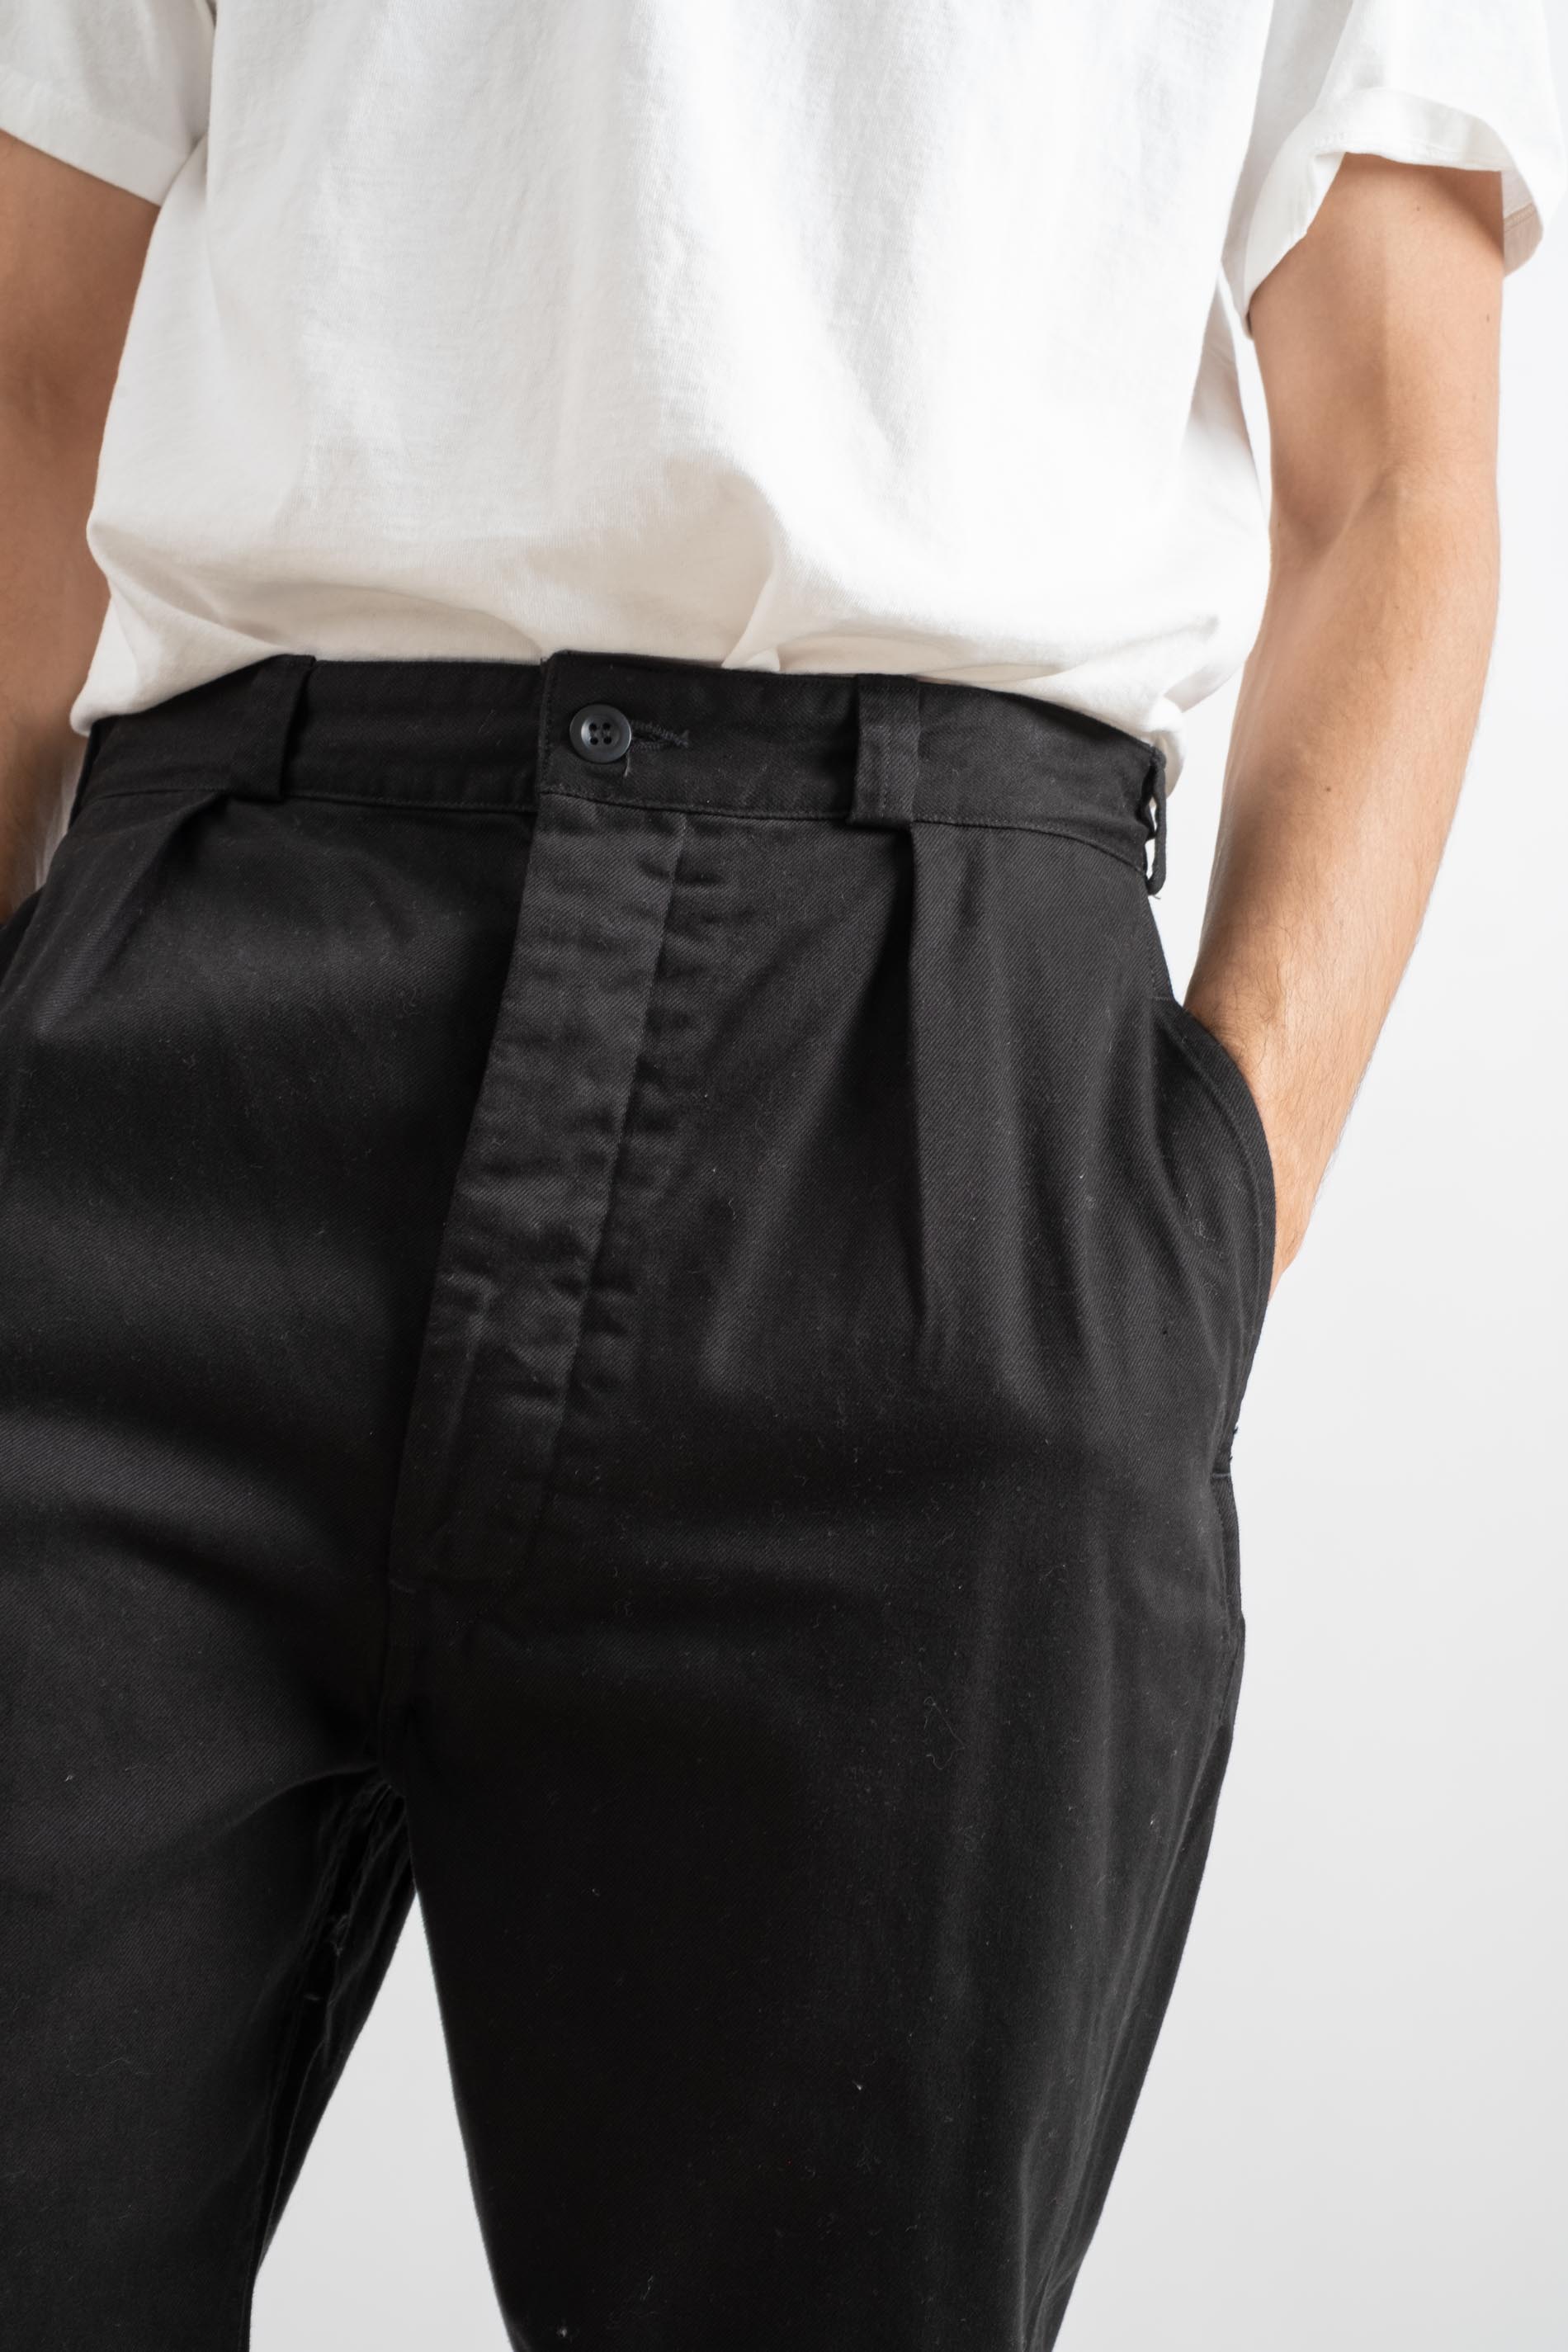 orSlow | M-52 FRENCH ARMY WIDE FIT TROUSER IN BLACK – RELIQUARY